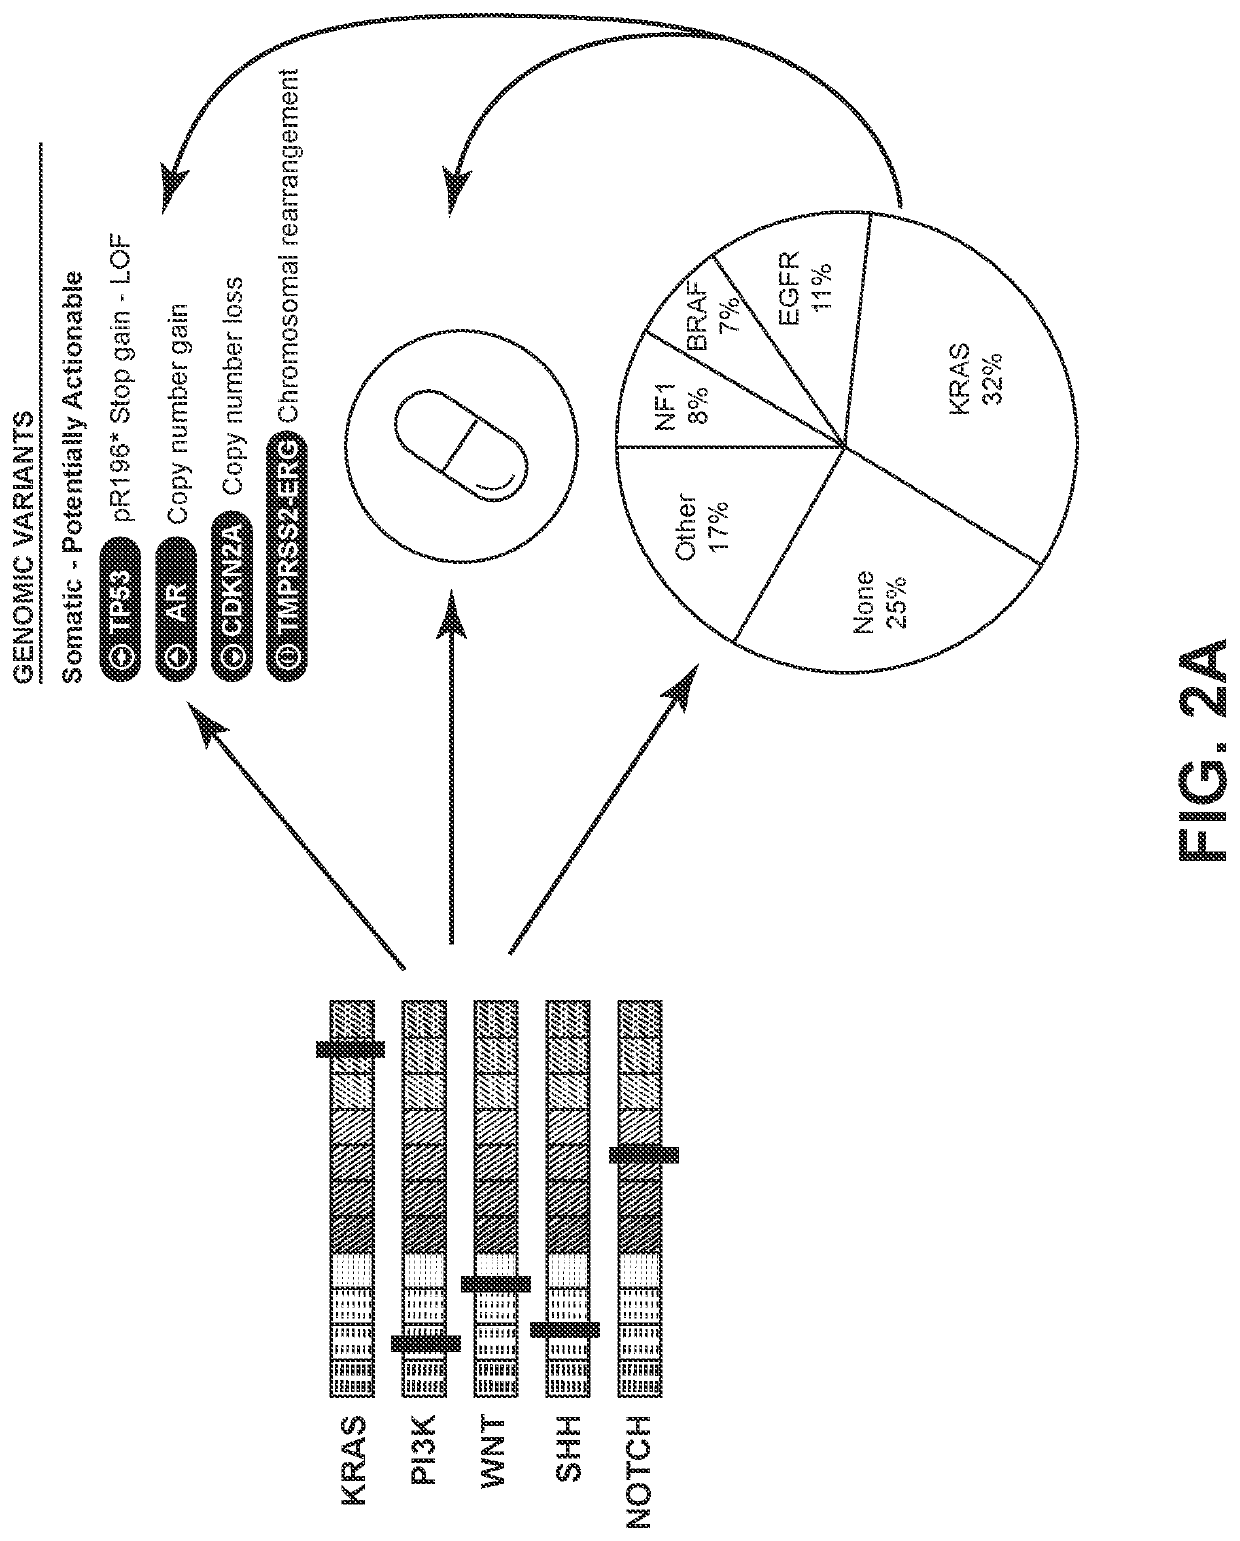 Systems and methods for detecting cellular pathway dysregulation in cancer specimens